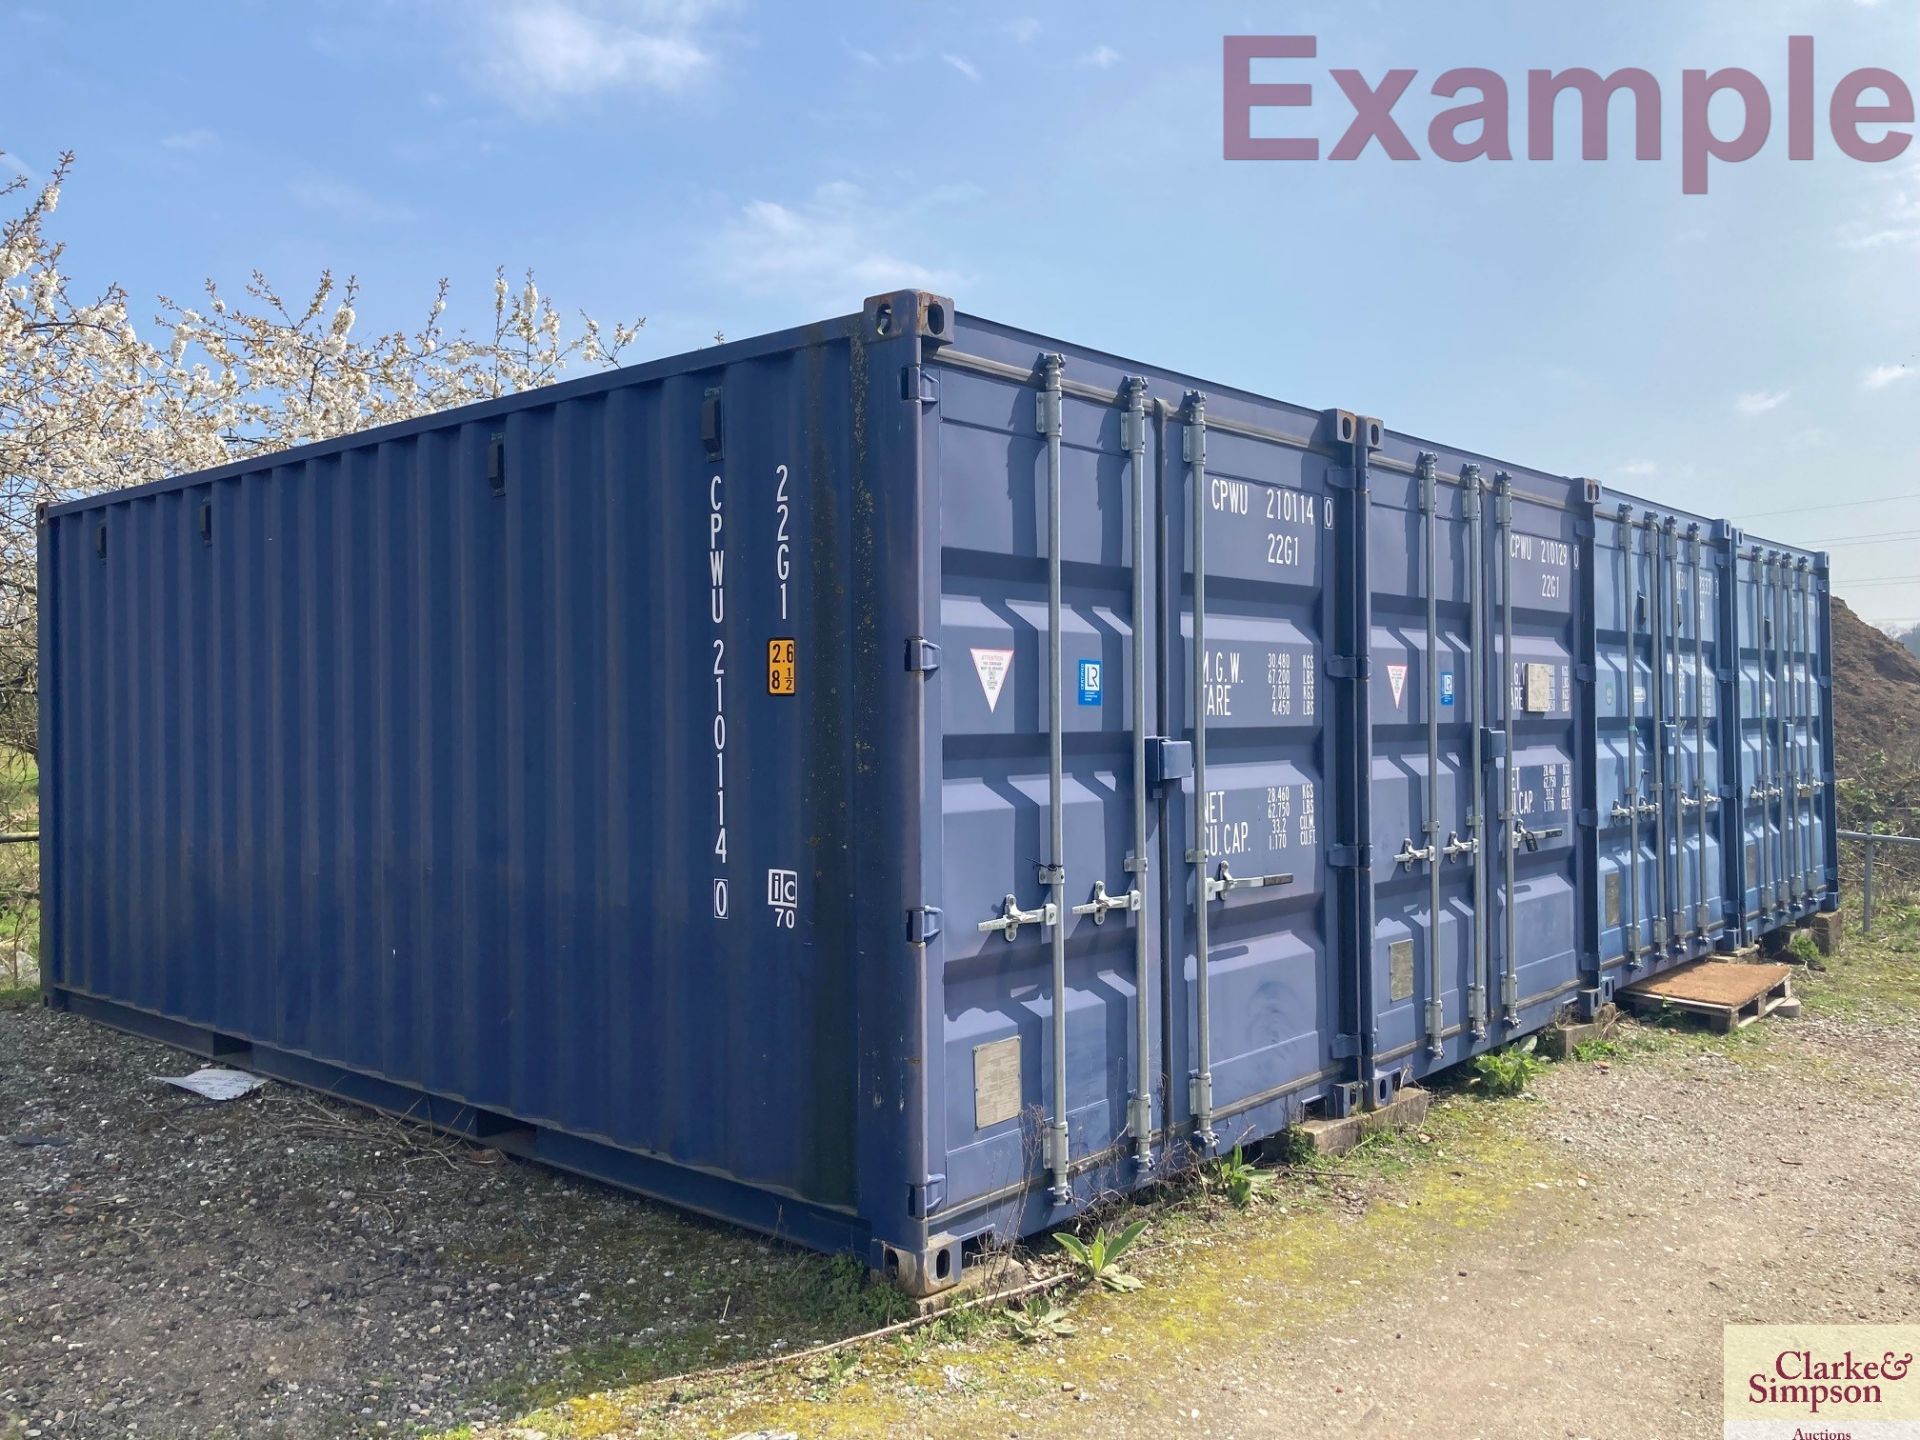 20ft one trip shipping container. Been used as storage. To be sold in situ and removed at